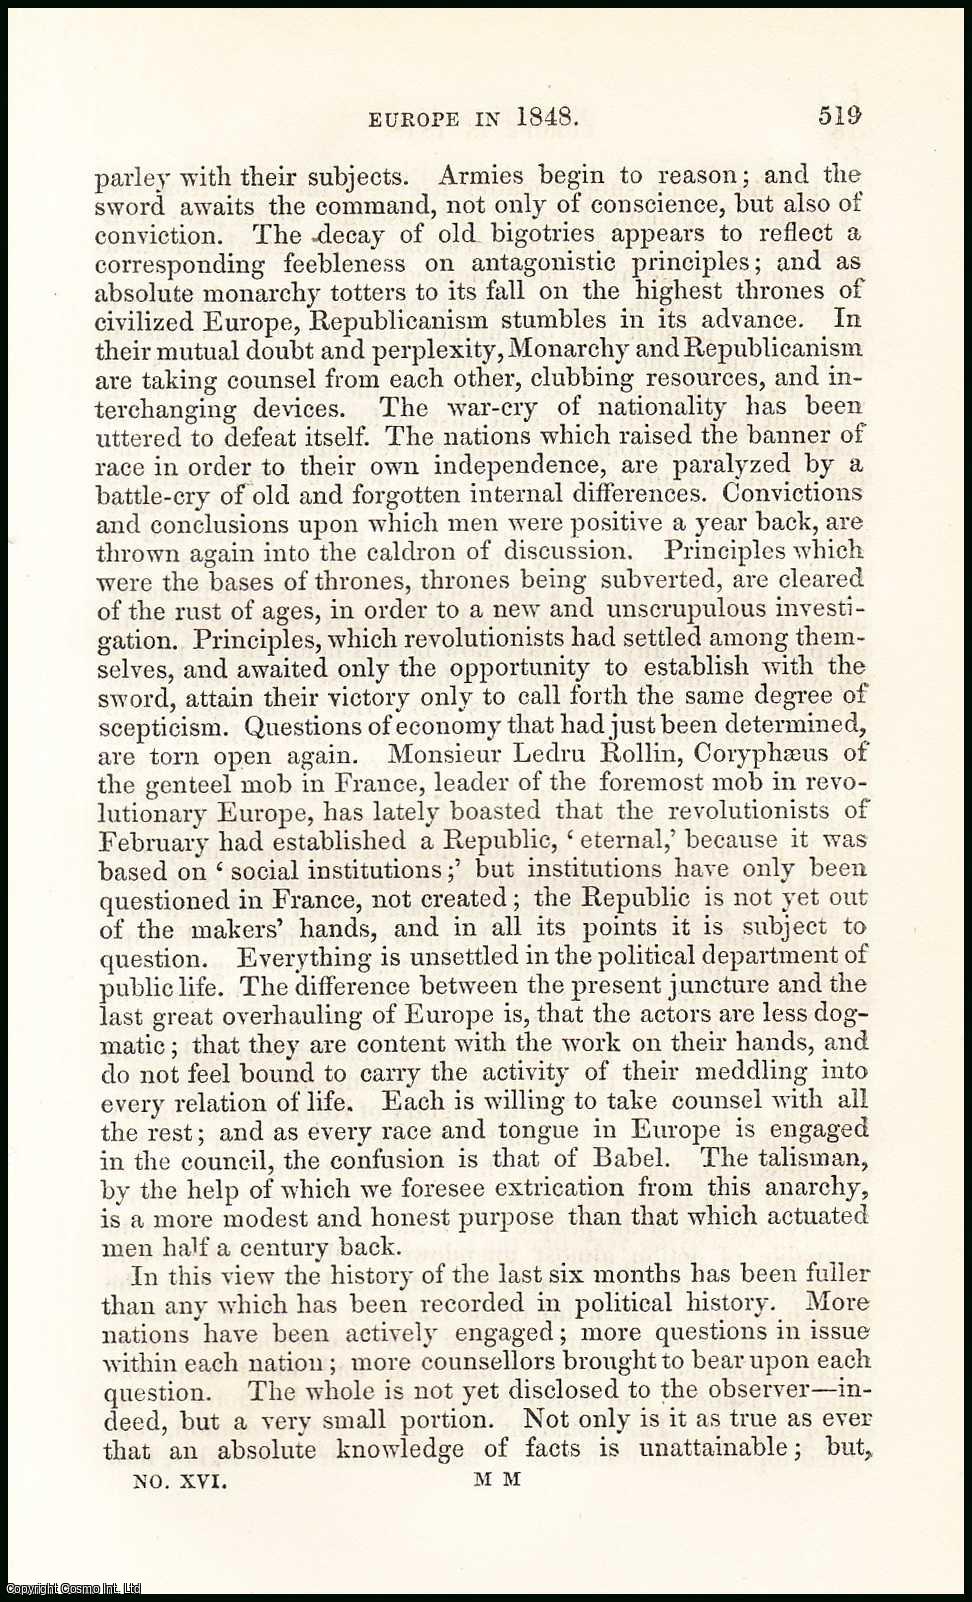 Author Unknown - Europe in 1848. A rare original article from the British Quarterly Review, 1848.